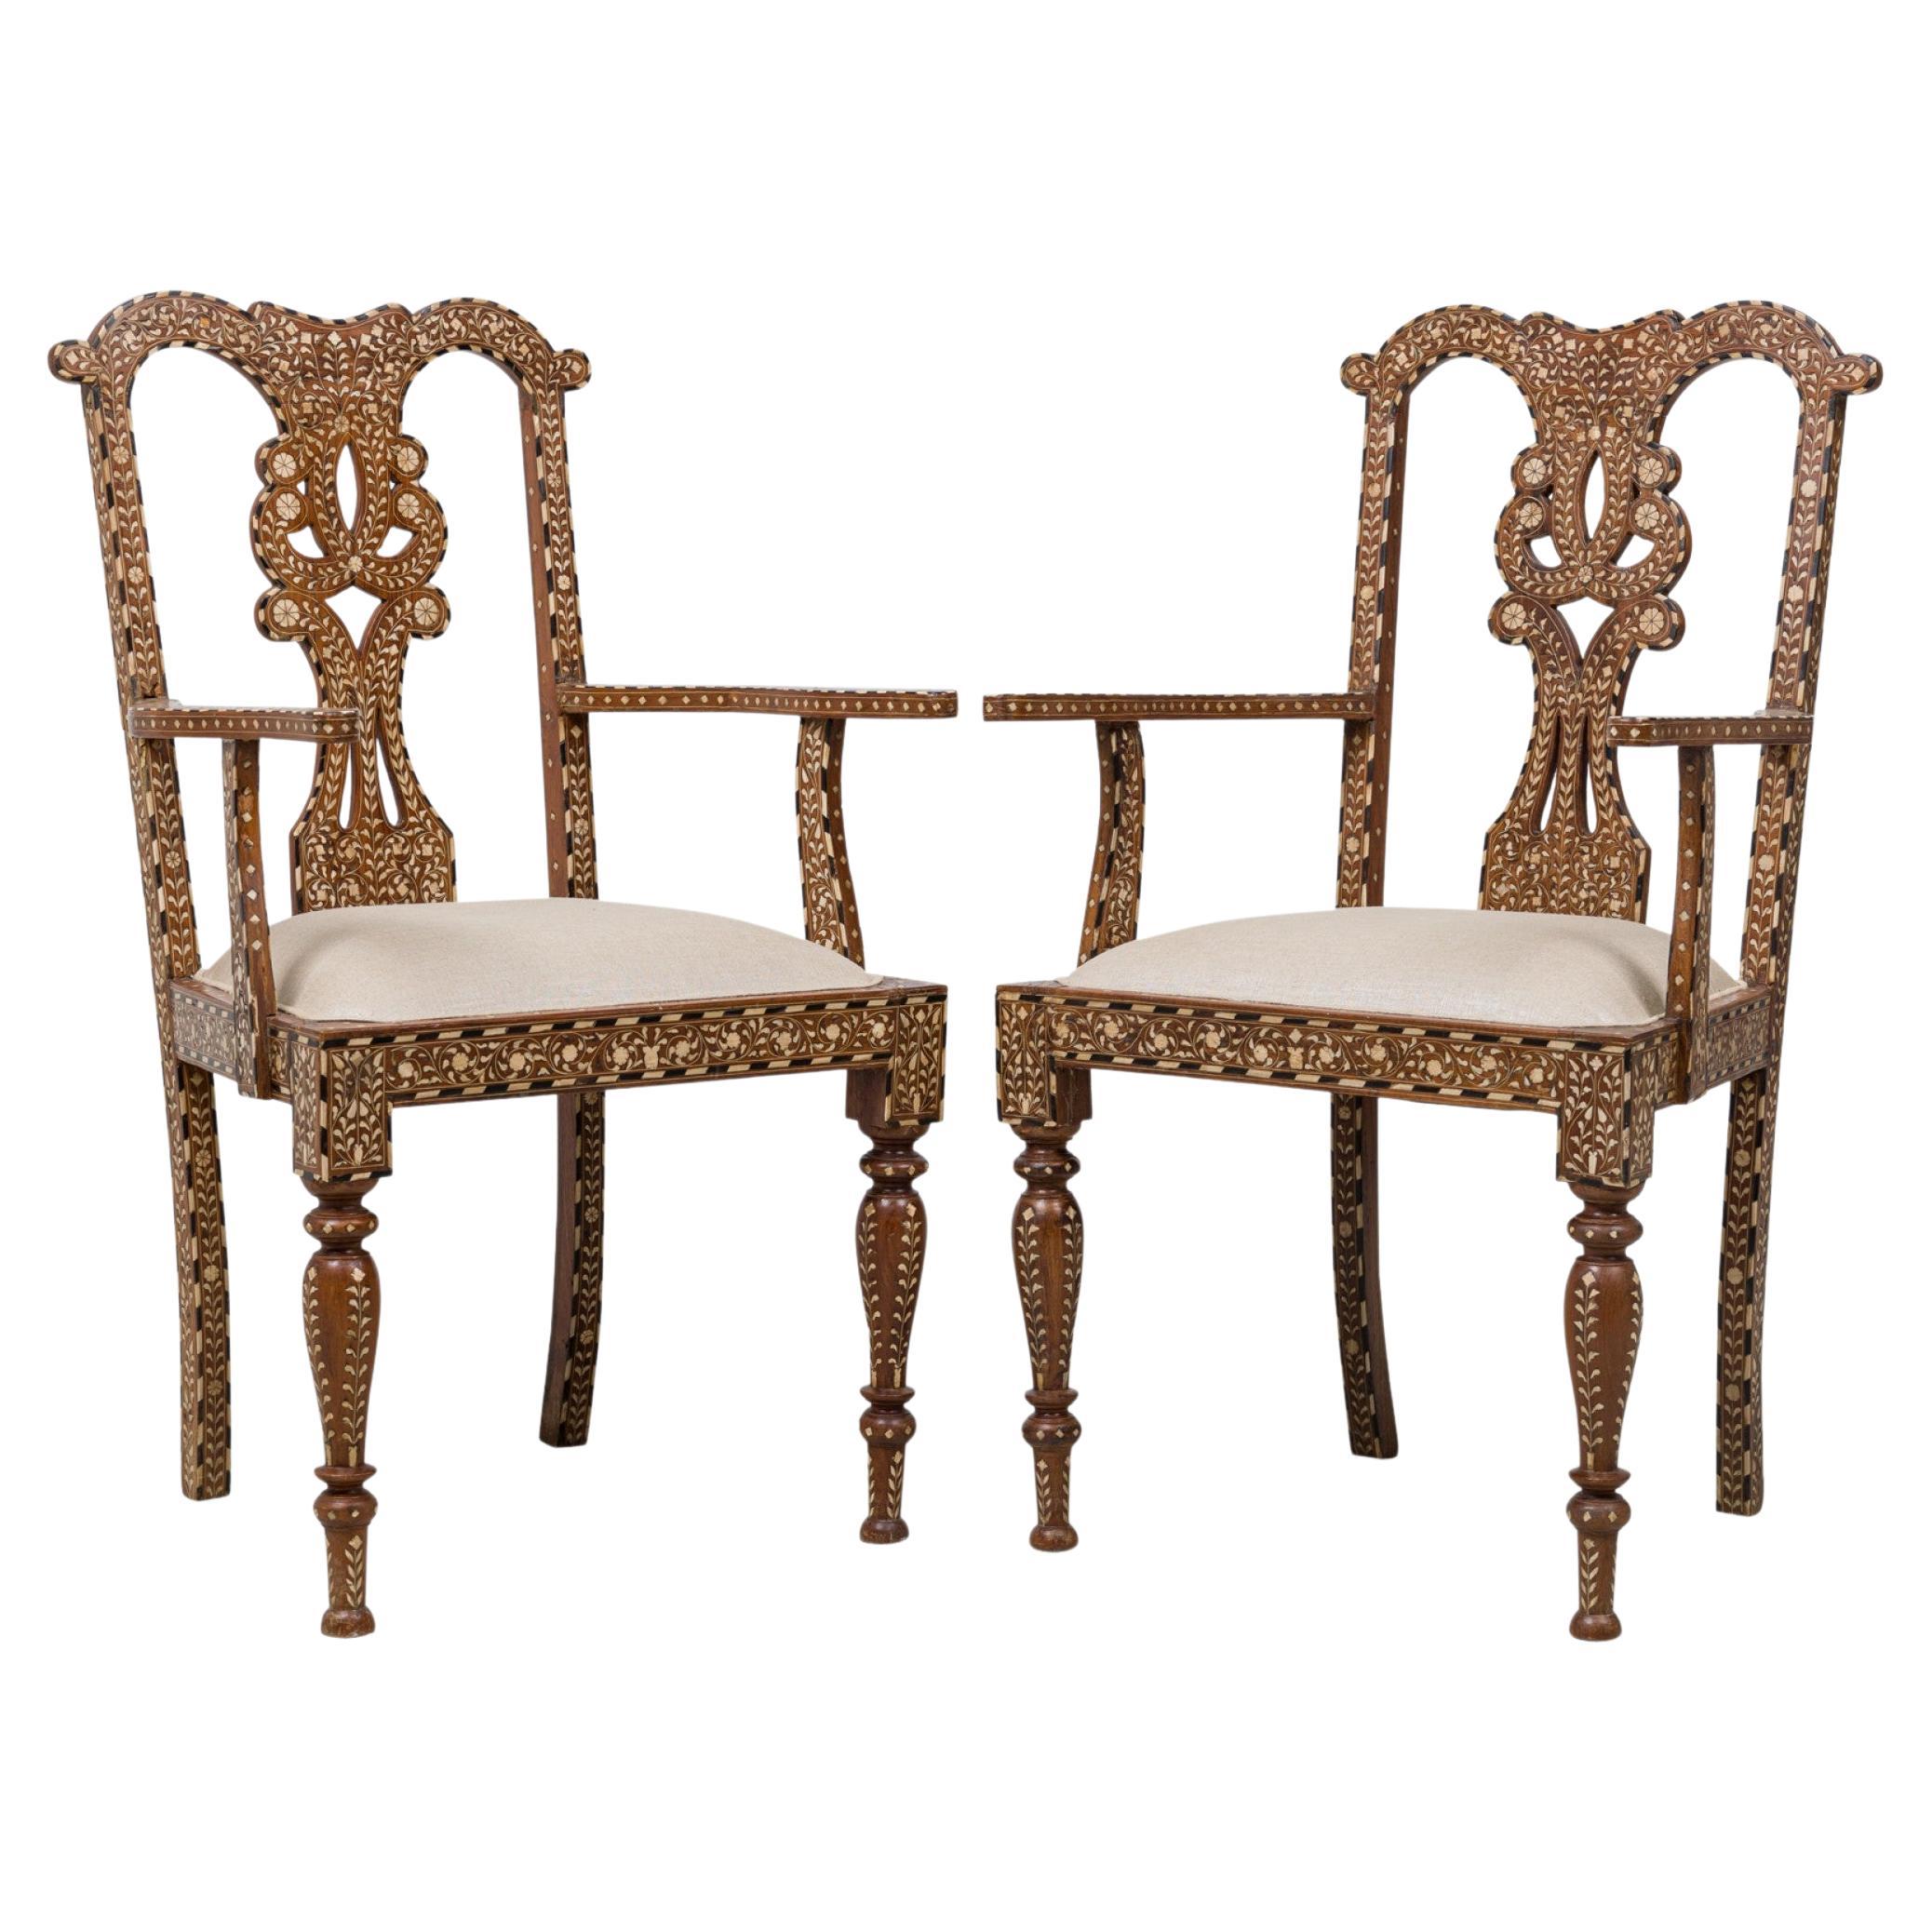 Set of 4 Anglo-Indian Carved Hardwood and Inlaid Armchairs